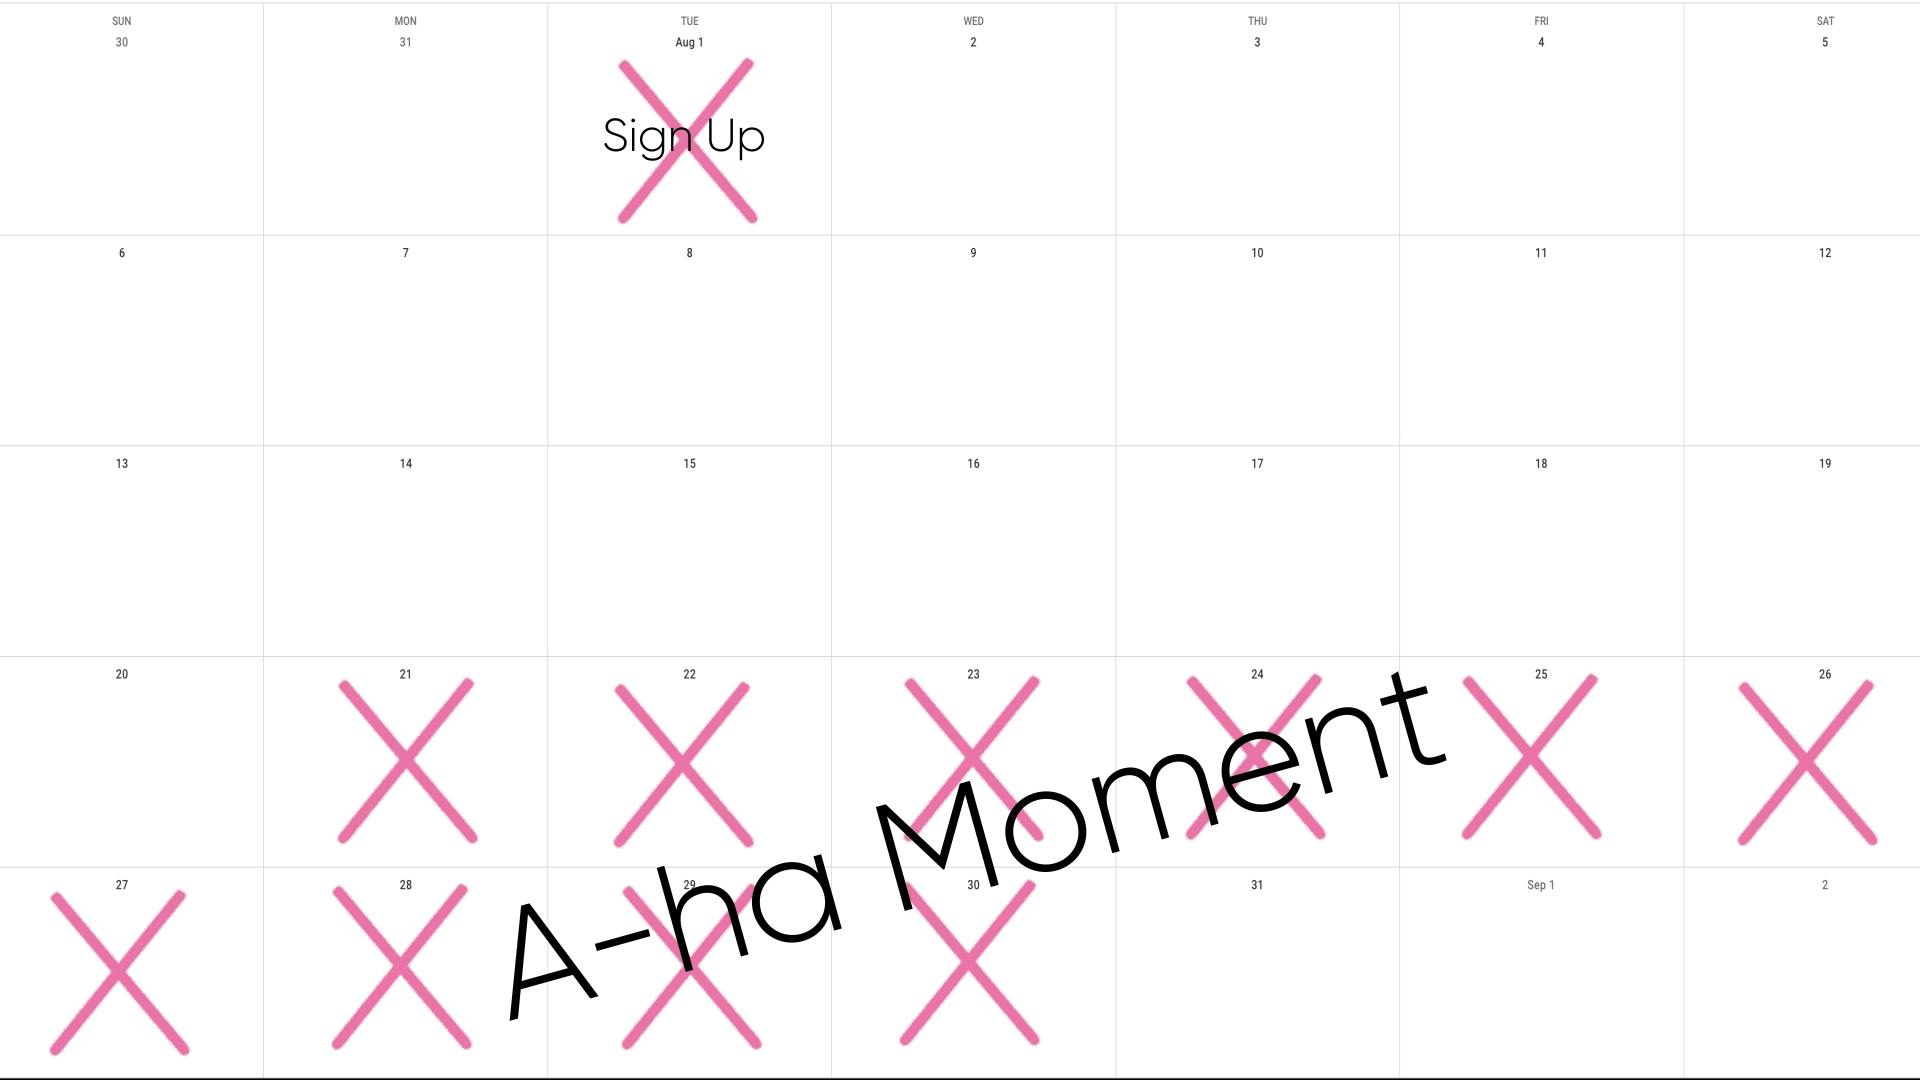 Freemium strategy in a calendar form featuring the "A-ha Moment"